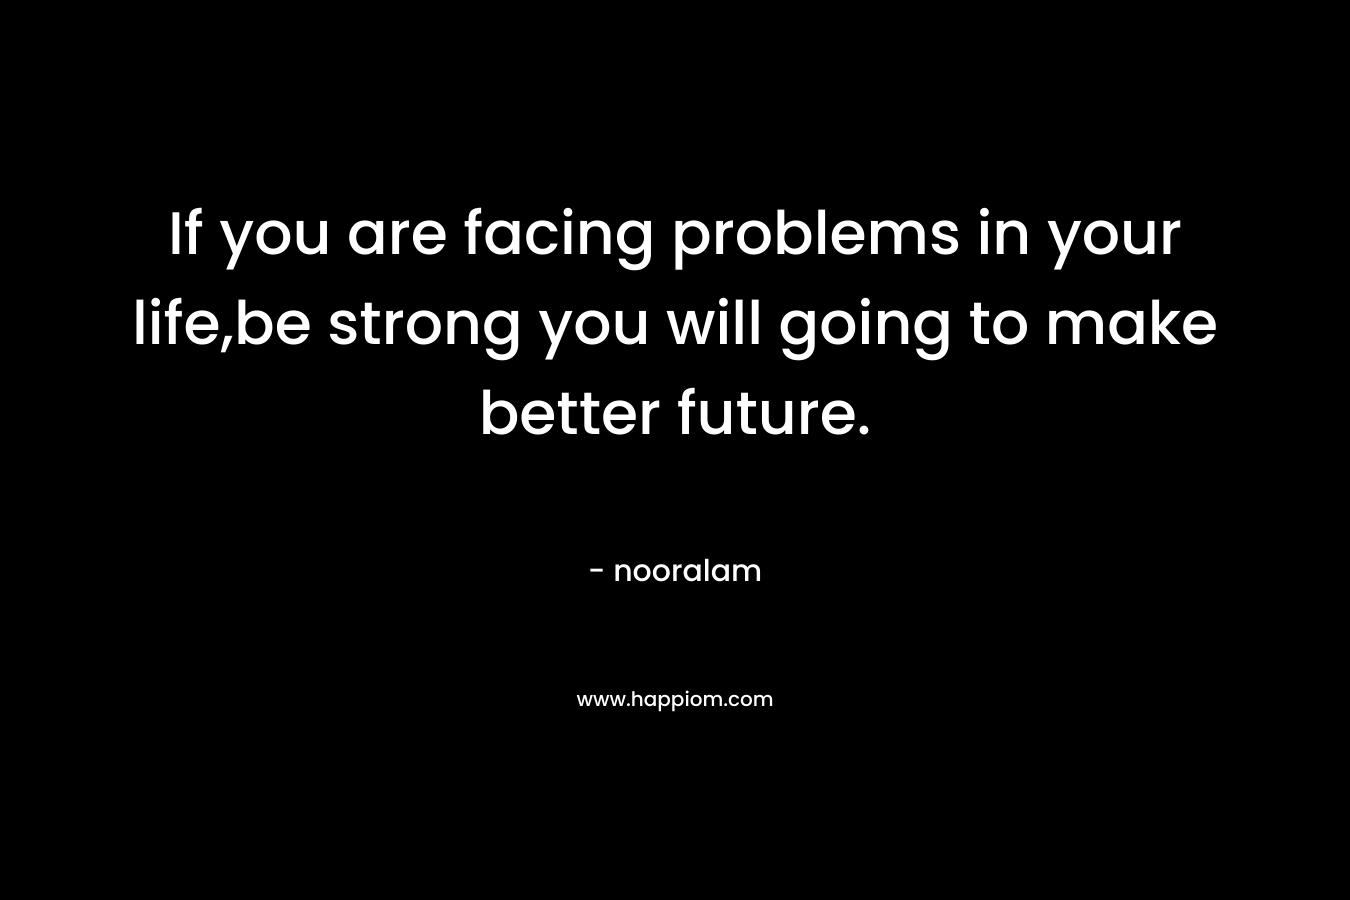 If you are facing problems in your life,be strong you will going to make better future. – nooralam